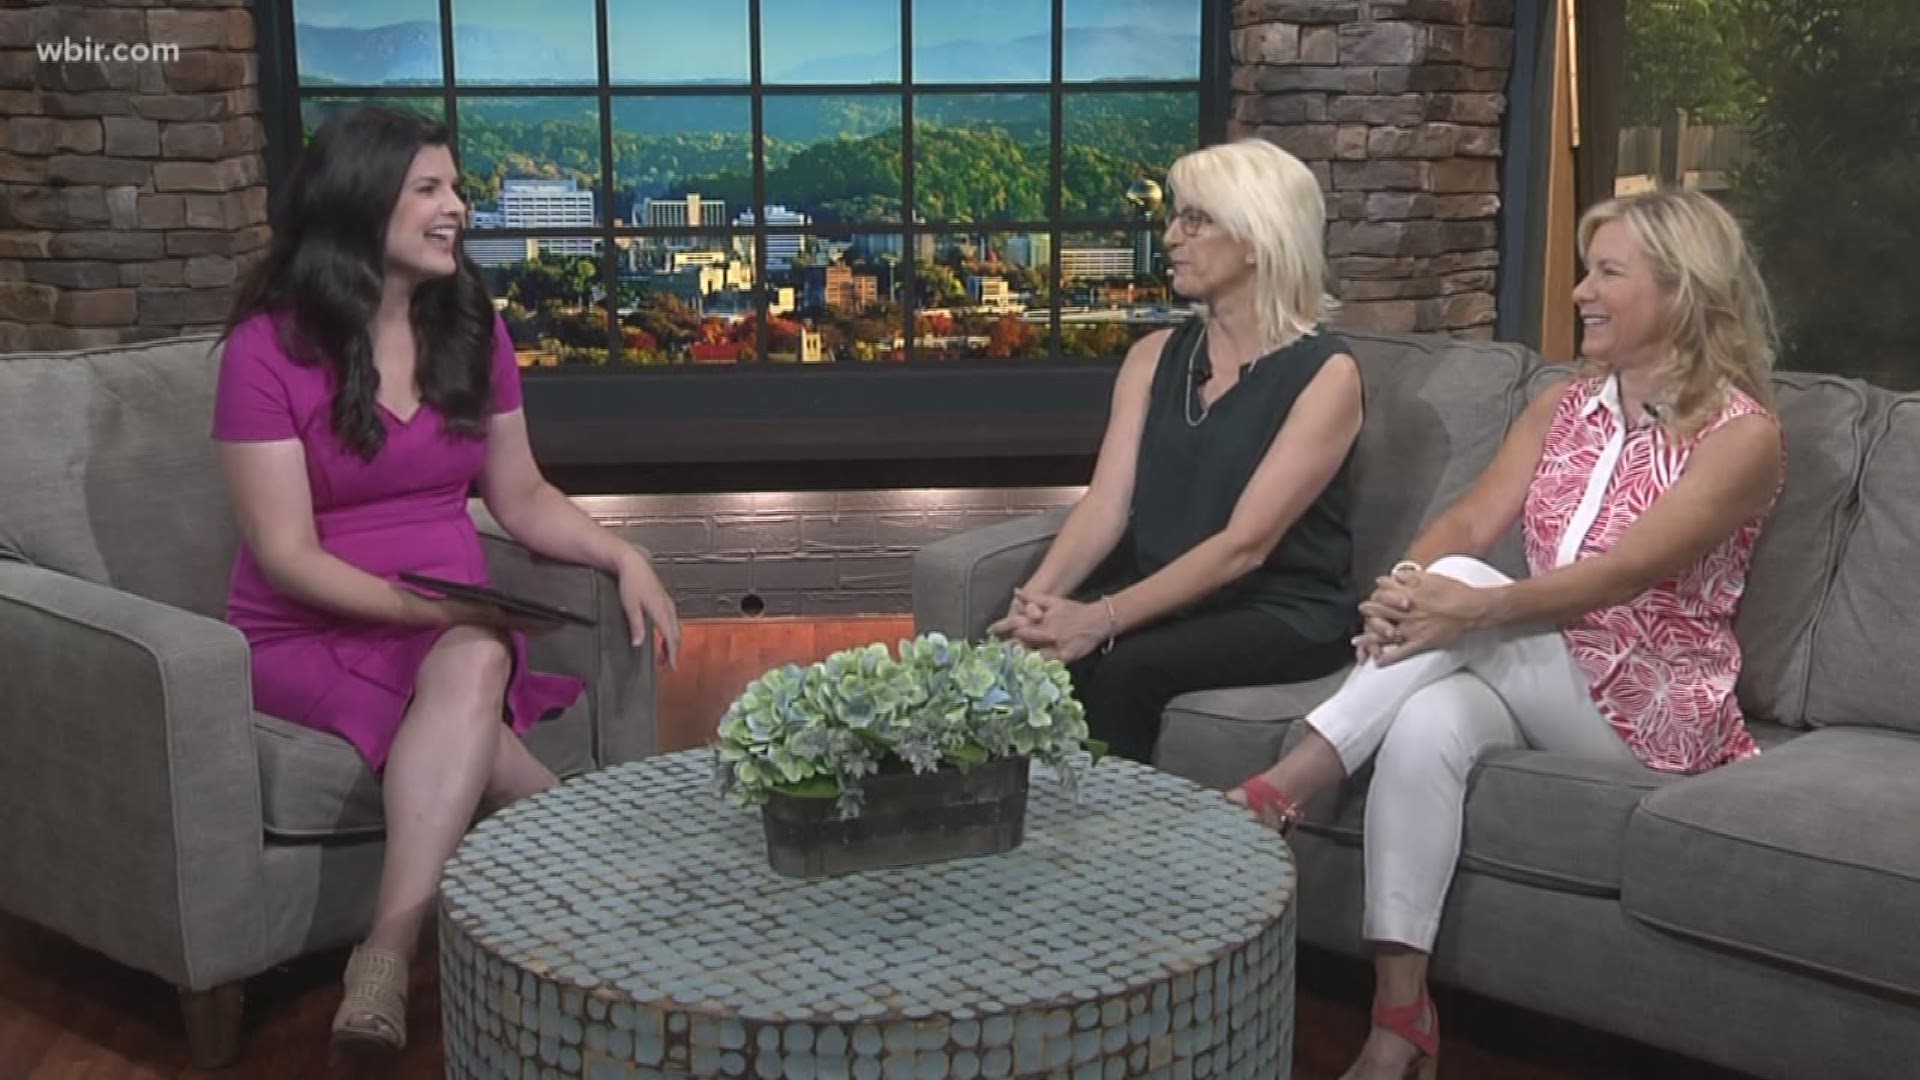 Our moms panel discusses some of the top parenting topics, including working mom guilt and taking your phone to bed.